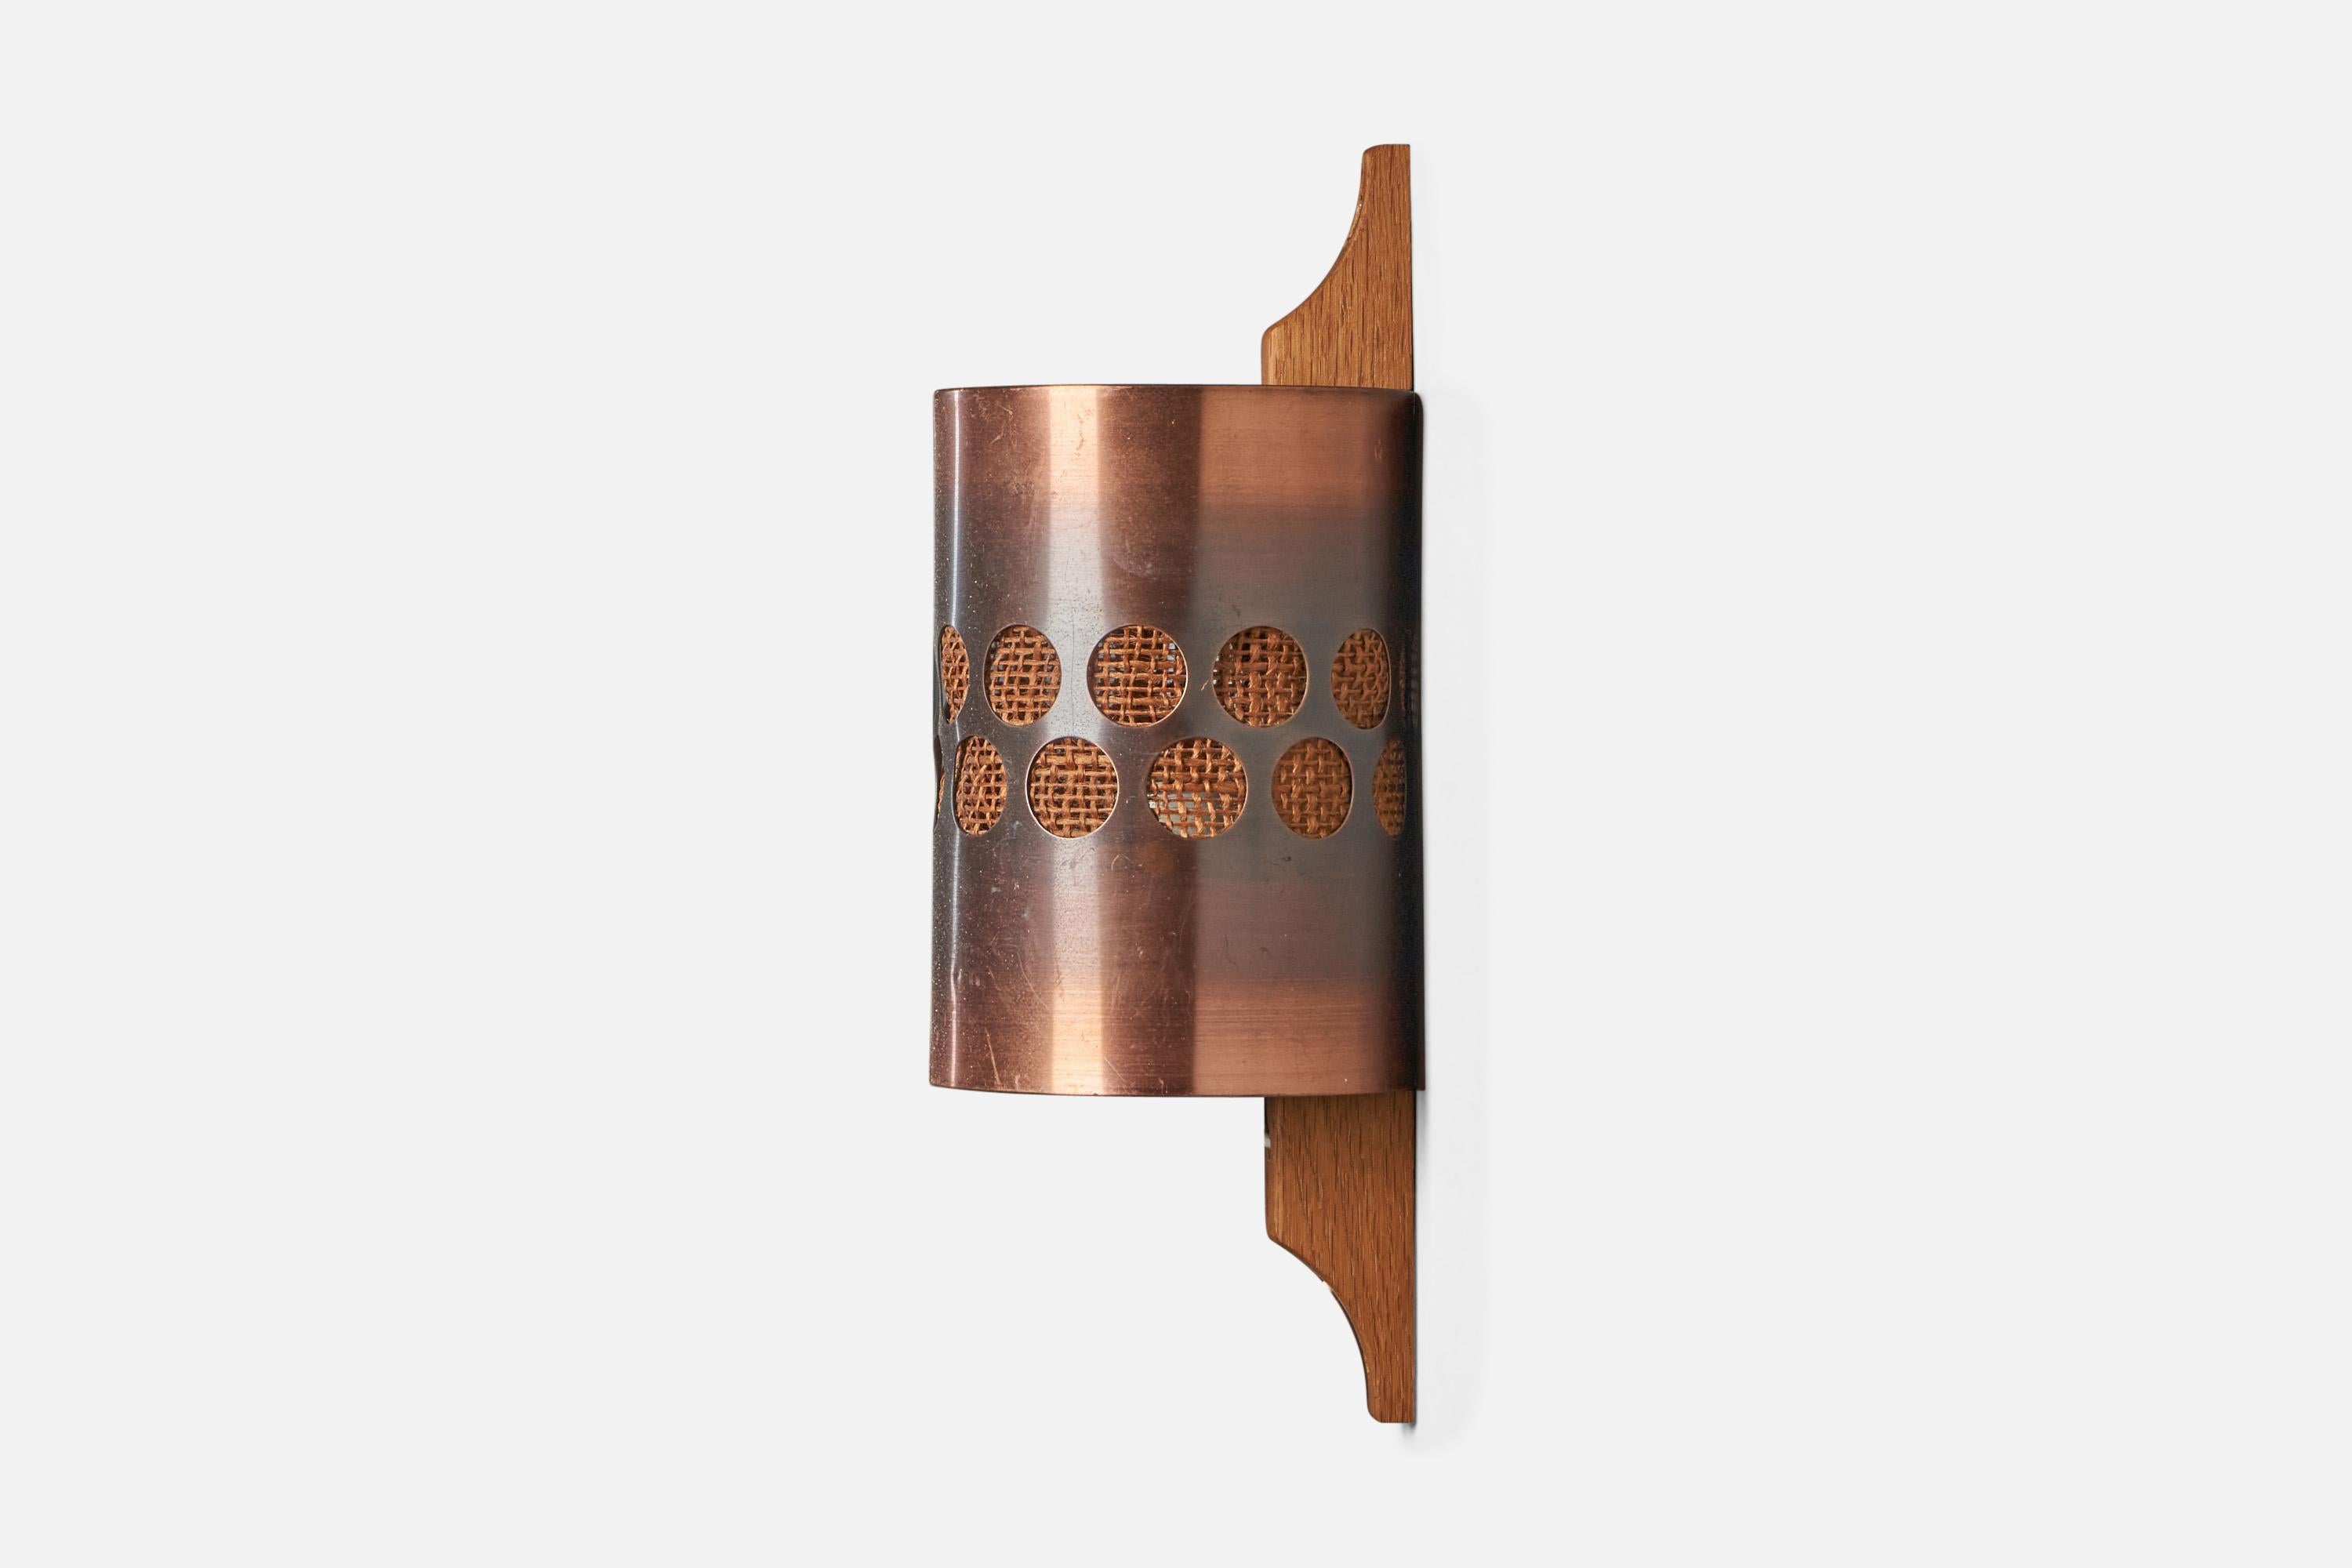 A pair of oak, burnished copper and raffia wall light, designed and produced by Nils Ledung, Bankaryd, Sweden, c. 1960s.

Overall Dimensions (inches): 11.25